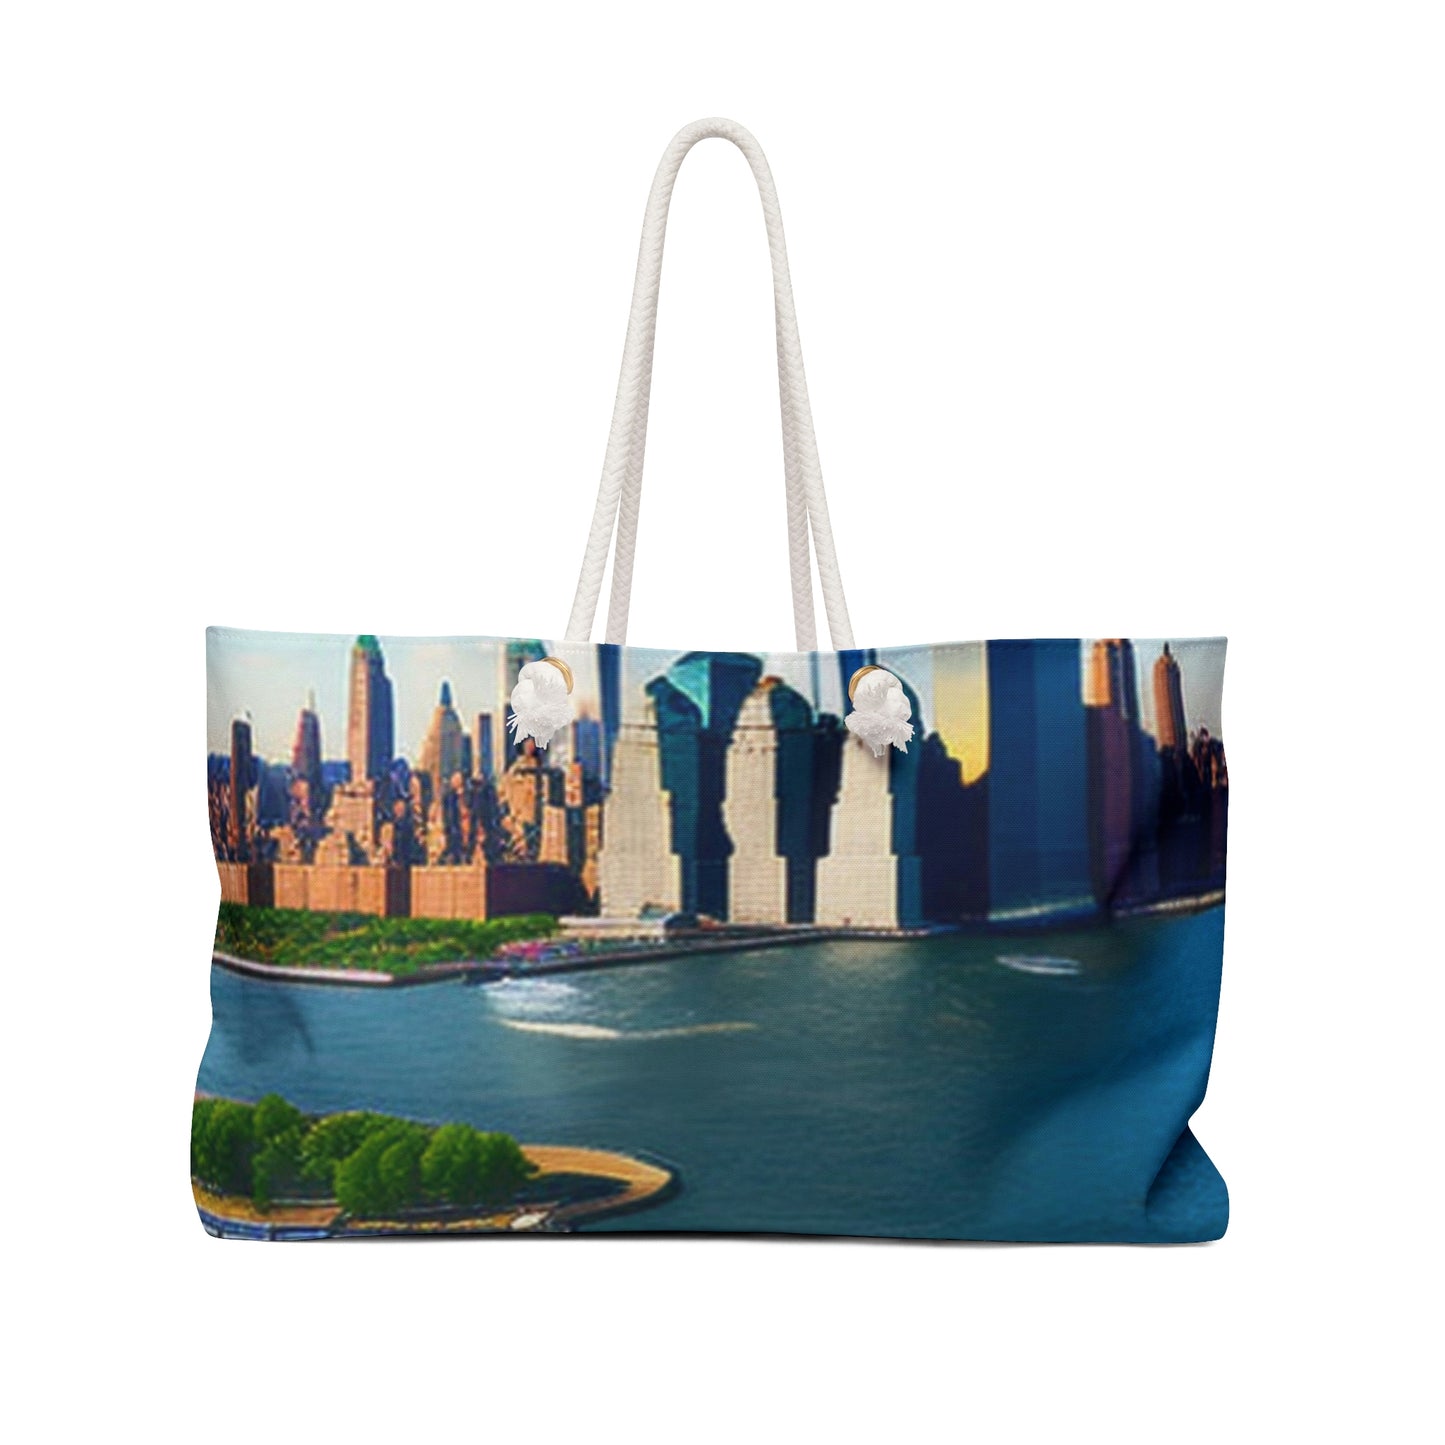 Shiba Inu Flying New York Weekender Bag | BKLA | Shoes & Accessories | shoes, hats, phone covers, tote bags, clutch bags